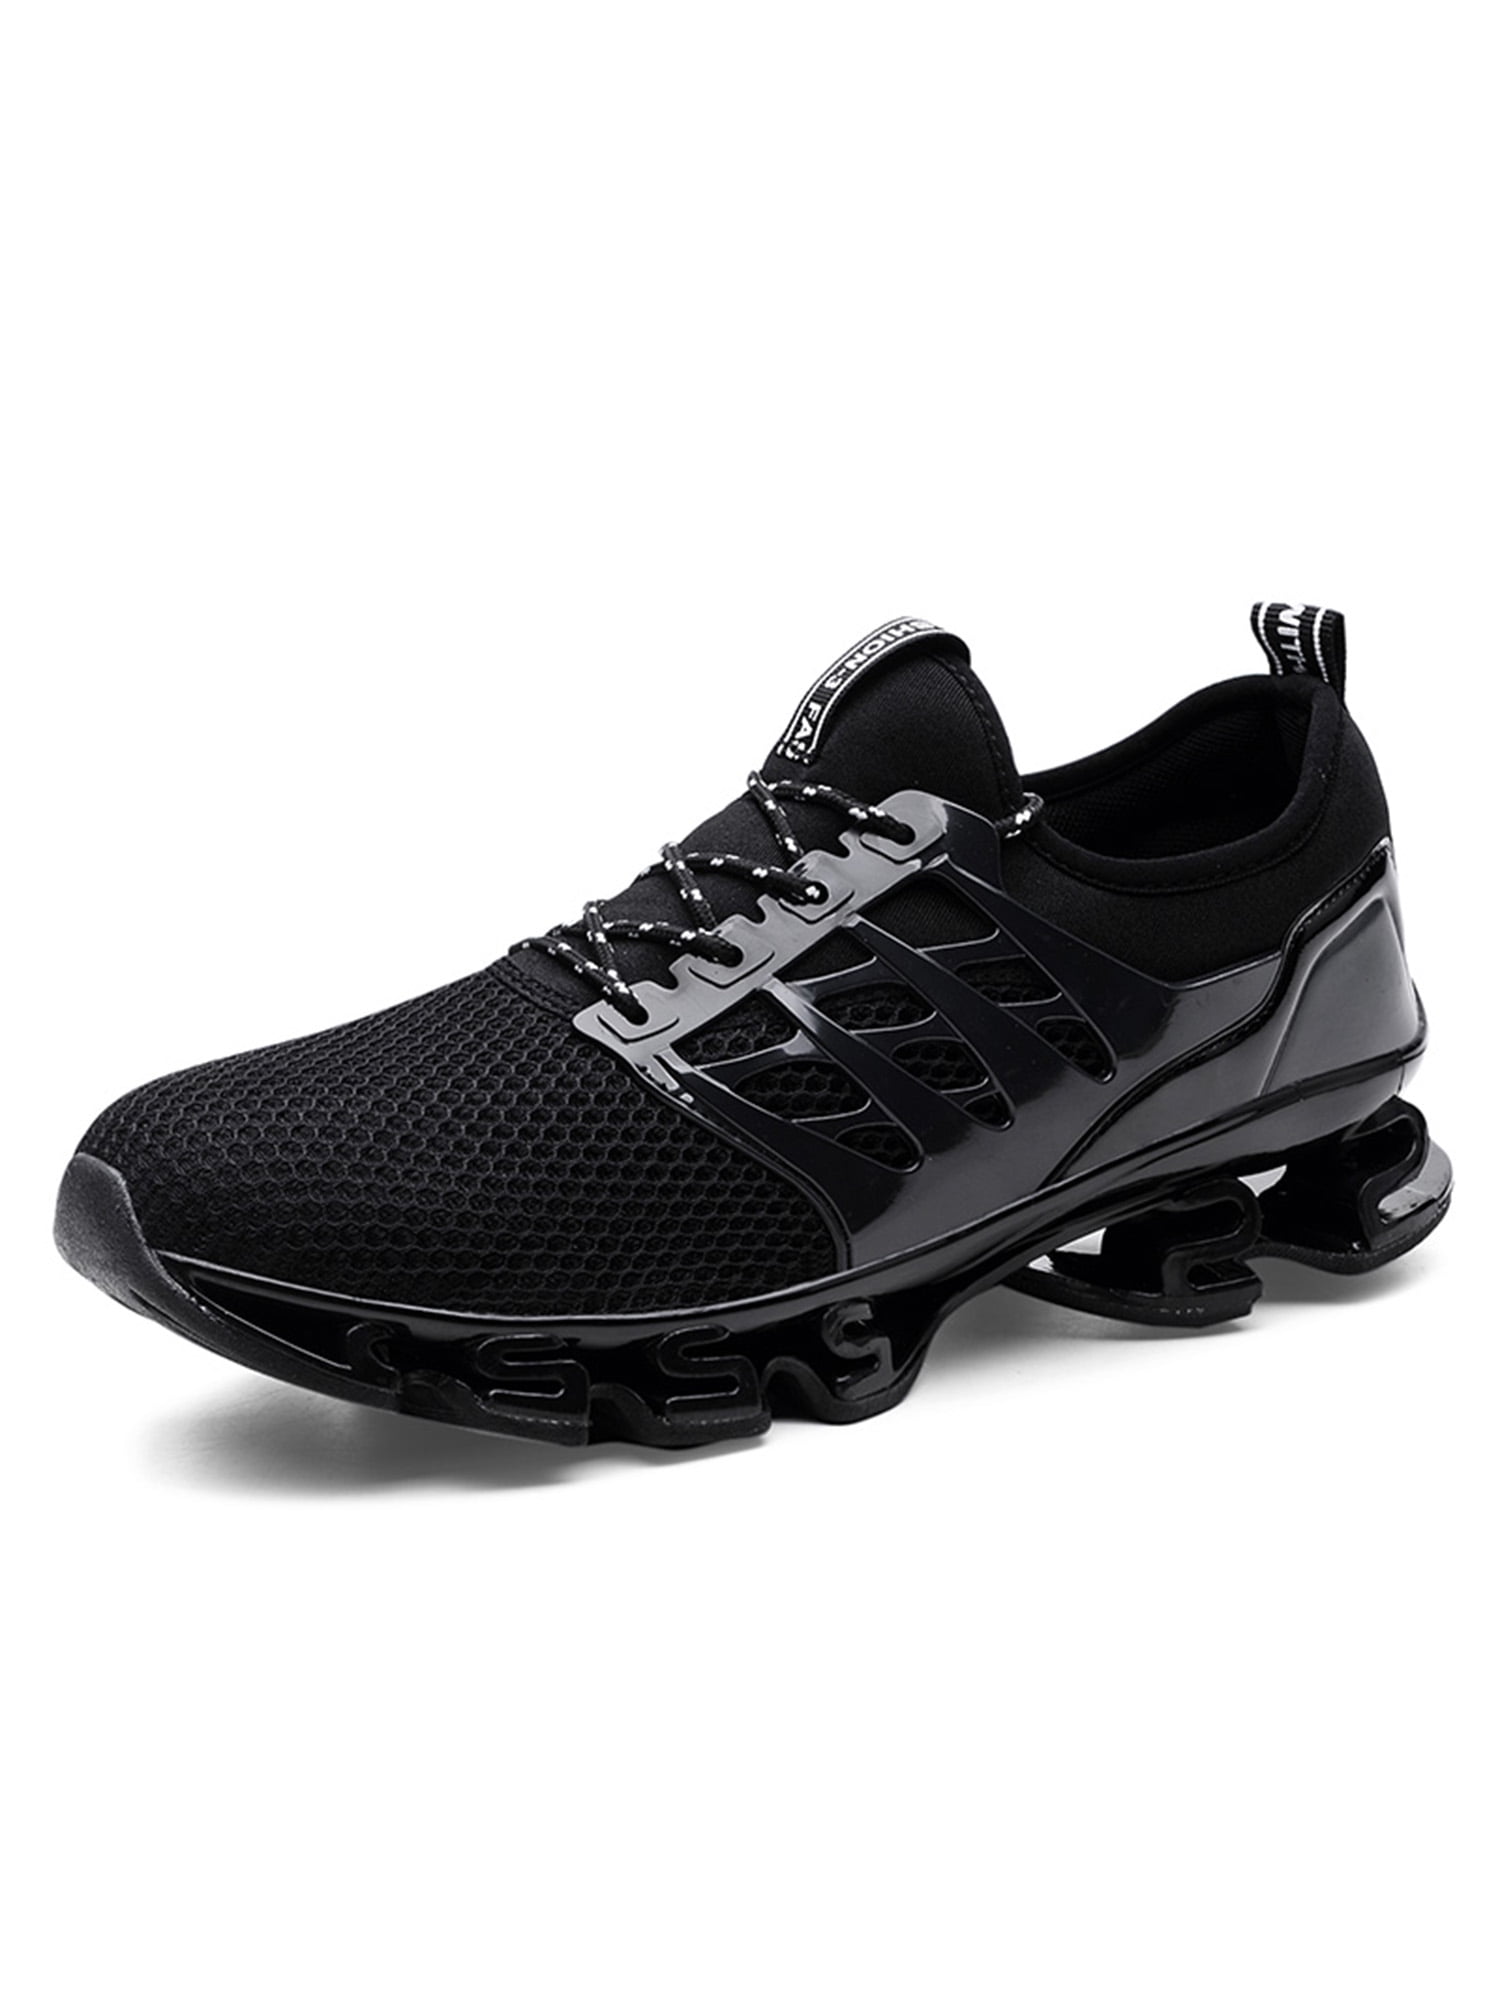 UKAP Womens Mens Athletic Shoes Sports Shoes Trainers Walking Running ...